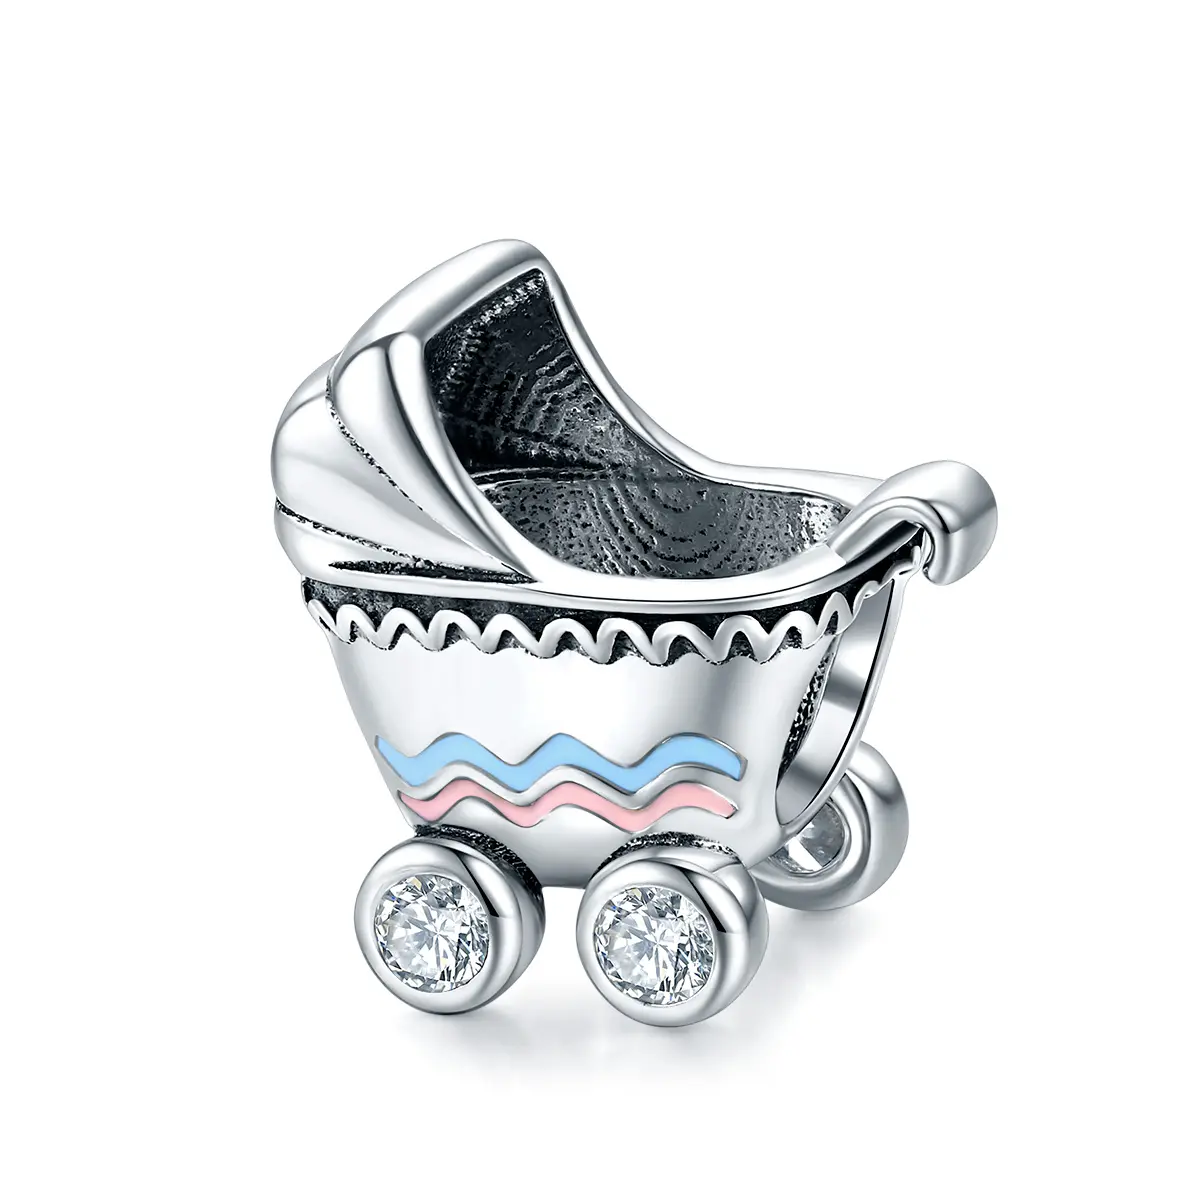 Miyami Cute Factory 925 Sterling Silver Bracelet Charms Silver Baby Carriage Charm Jewelry for bracelet and necklace